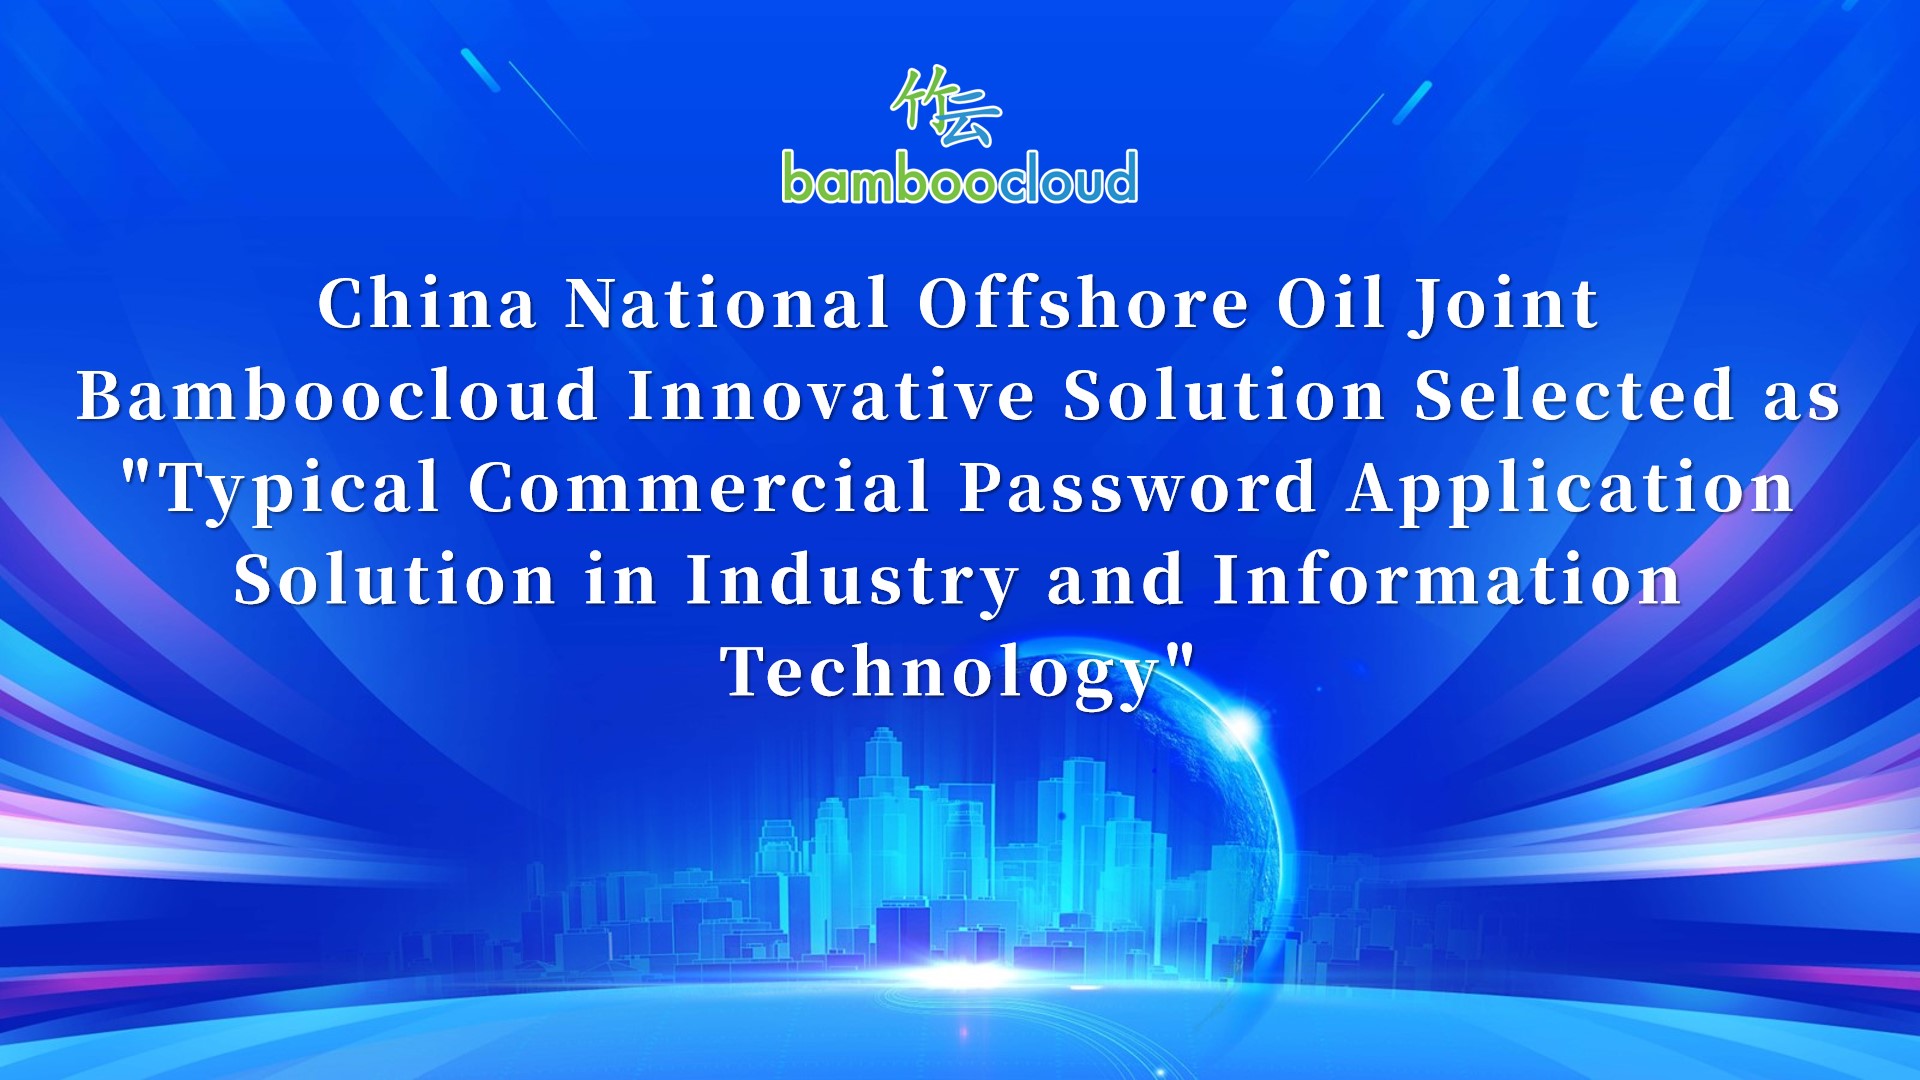 China National Offshore Oil Joint Bamboocloud Innovative Solution Selected as "Typical Commercial Password Application Solution in Industry and Information Technology"